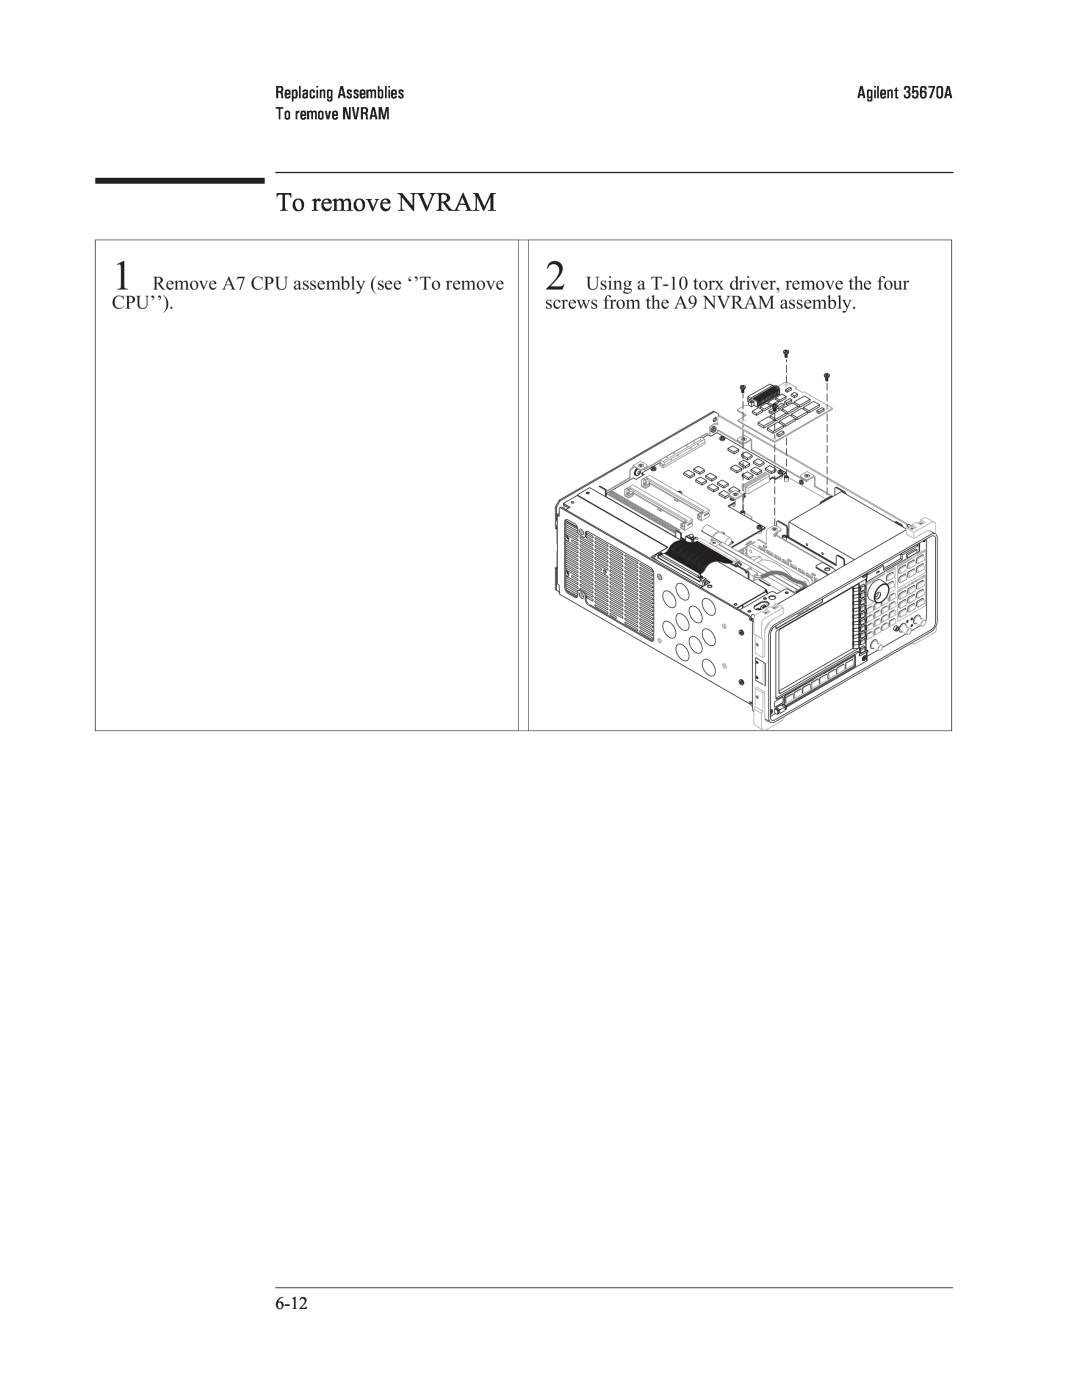 Agilent Technologies 35670-90066 manual To remove NVRAM, Remove A7 CPU assembly see ‘’To remove CPU’’, Replacing Assemblies 